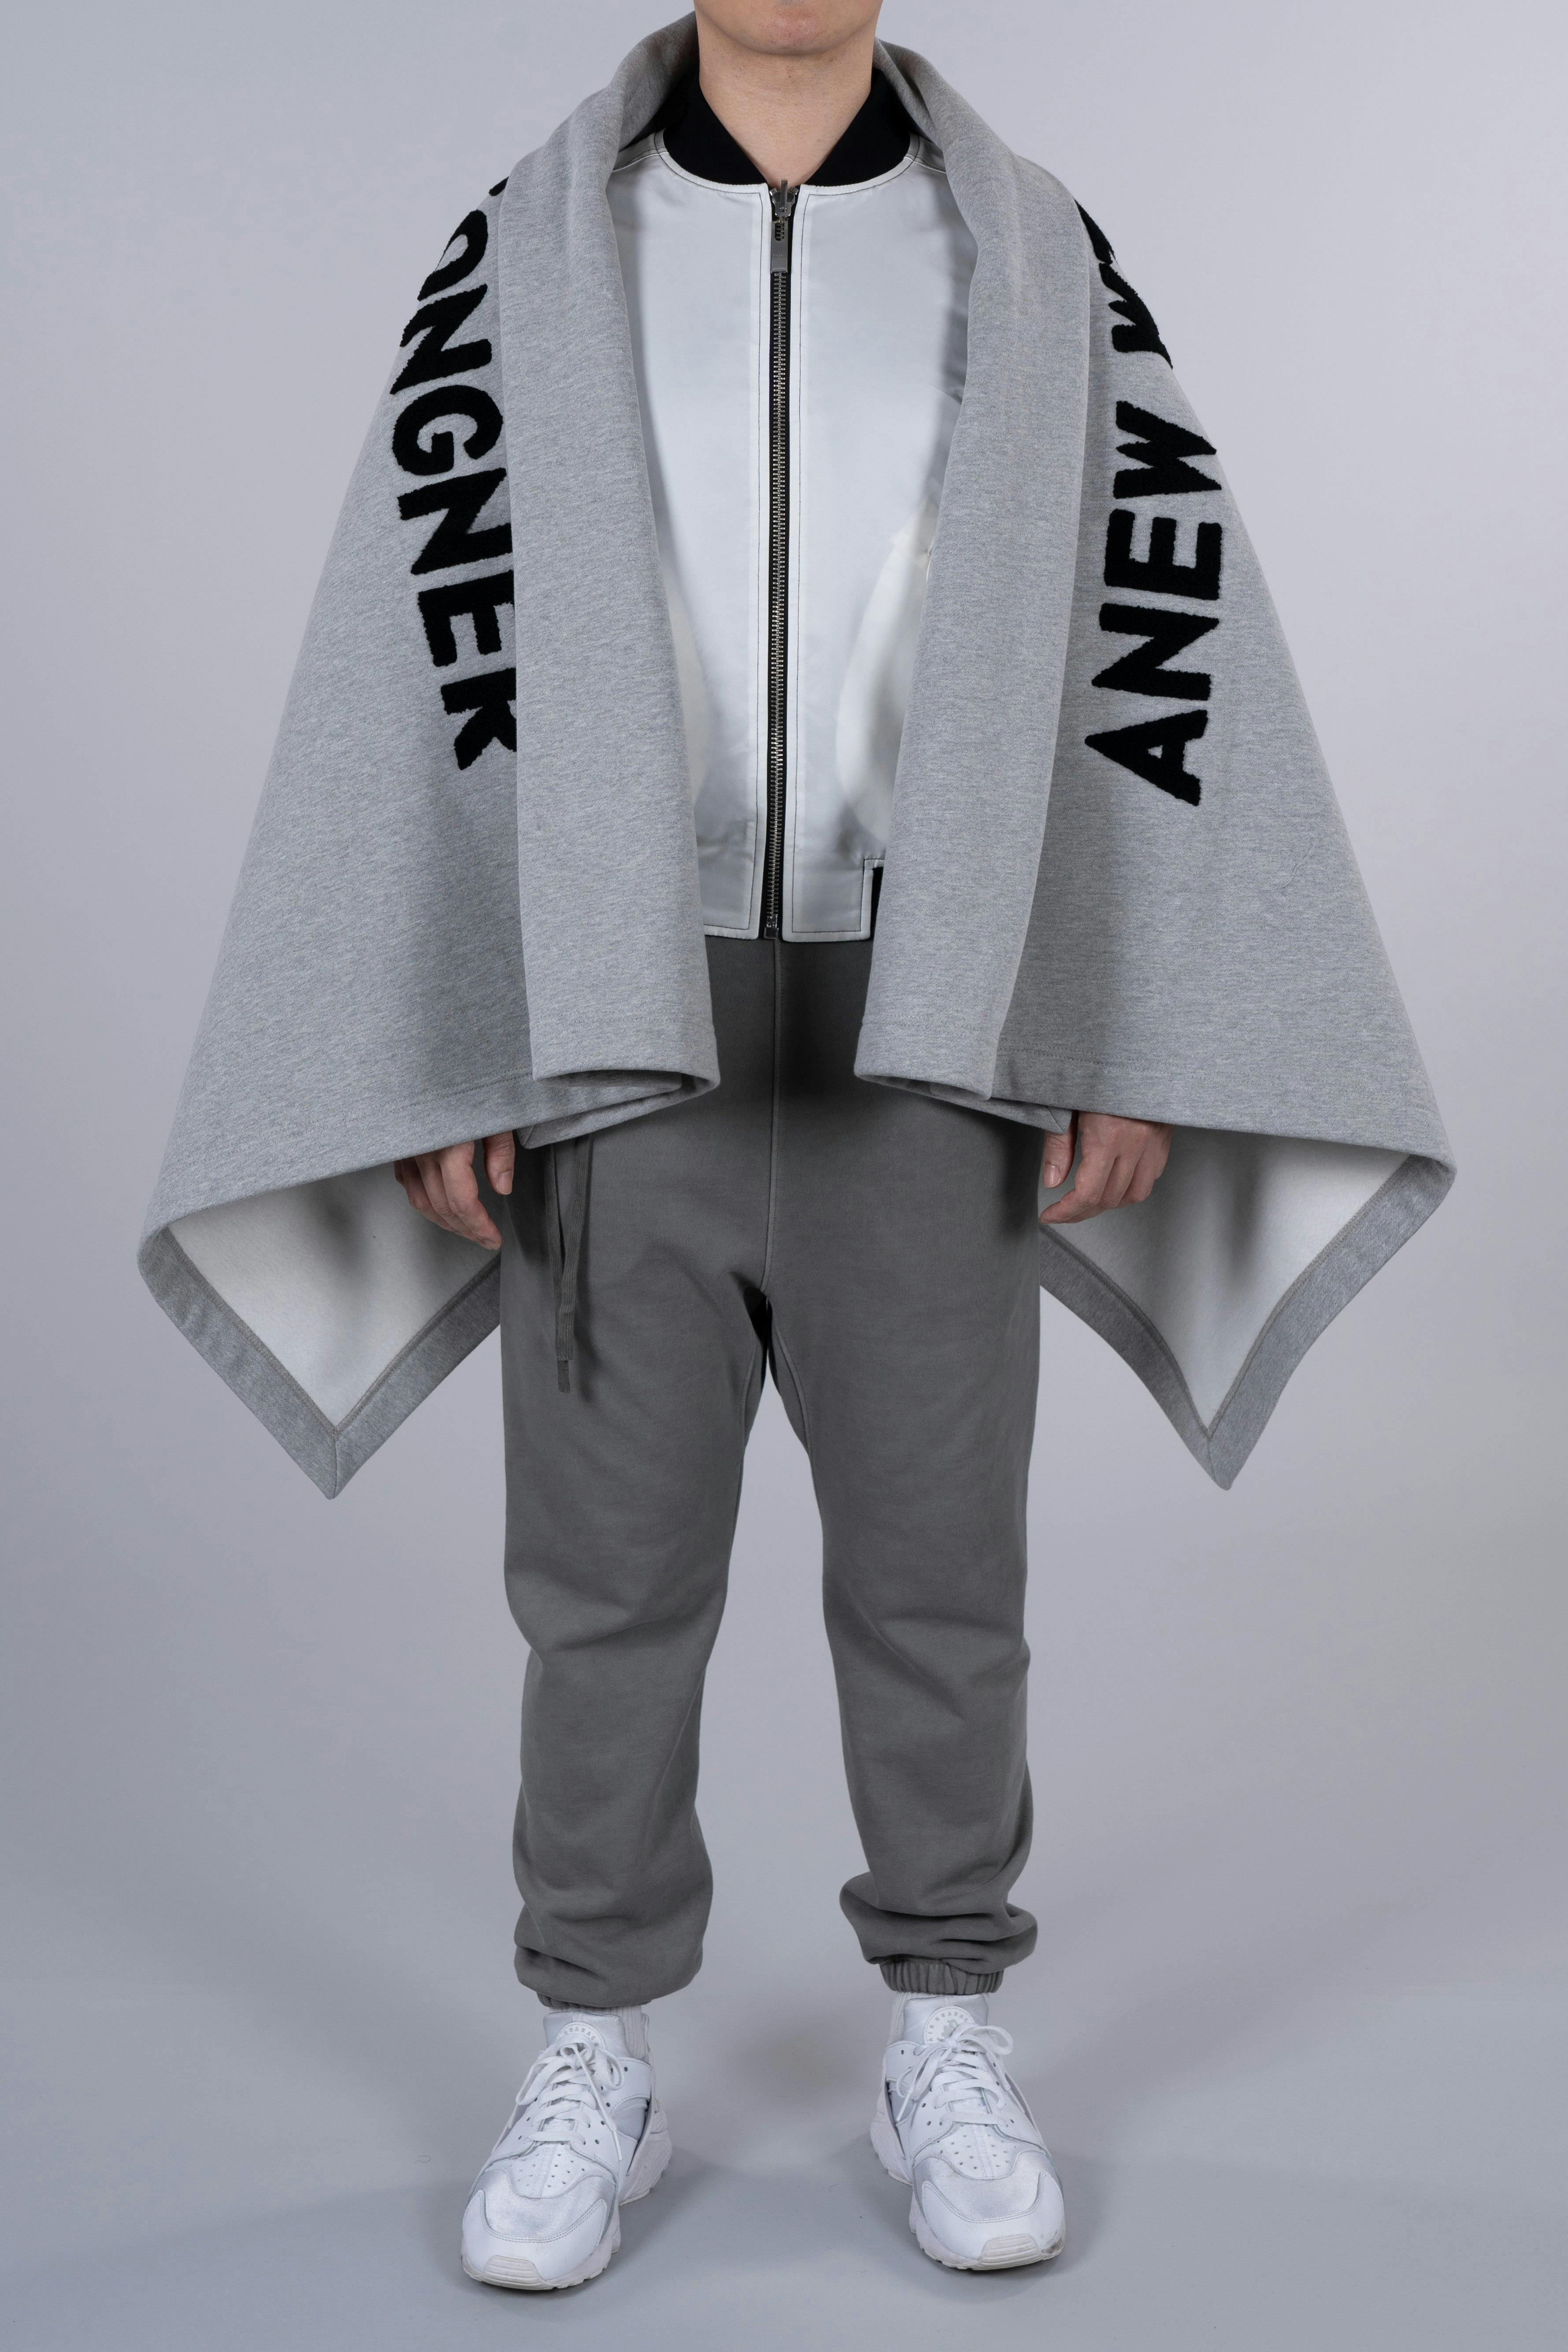 ˝SET THINGS RIGHT˝ Cotton Blanket - Grey